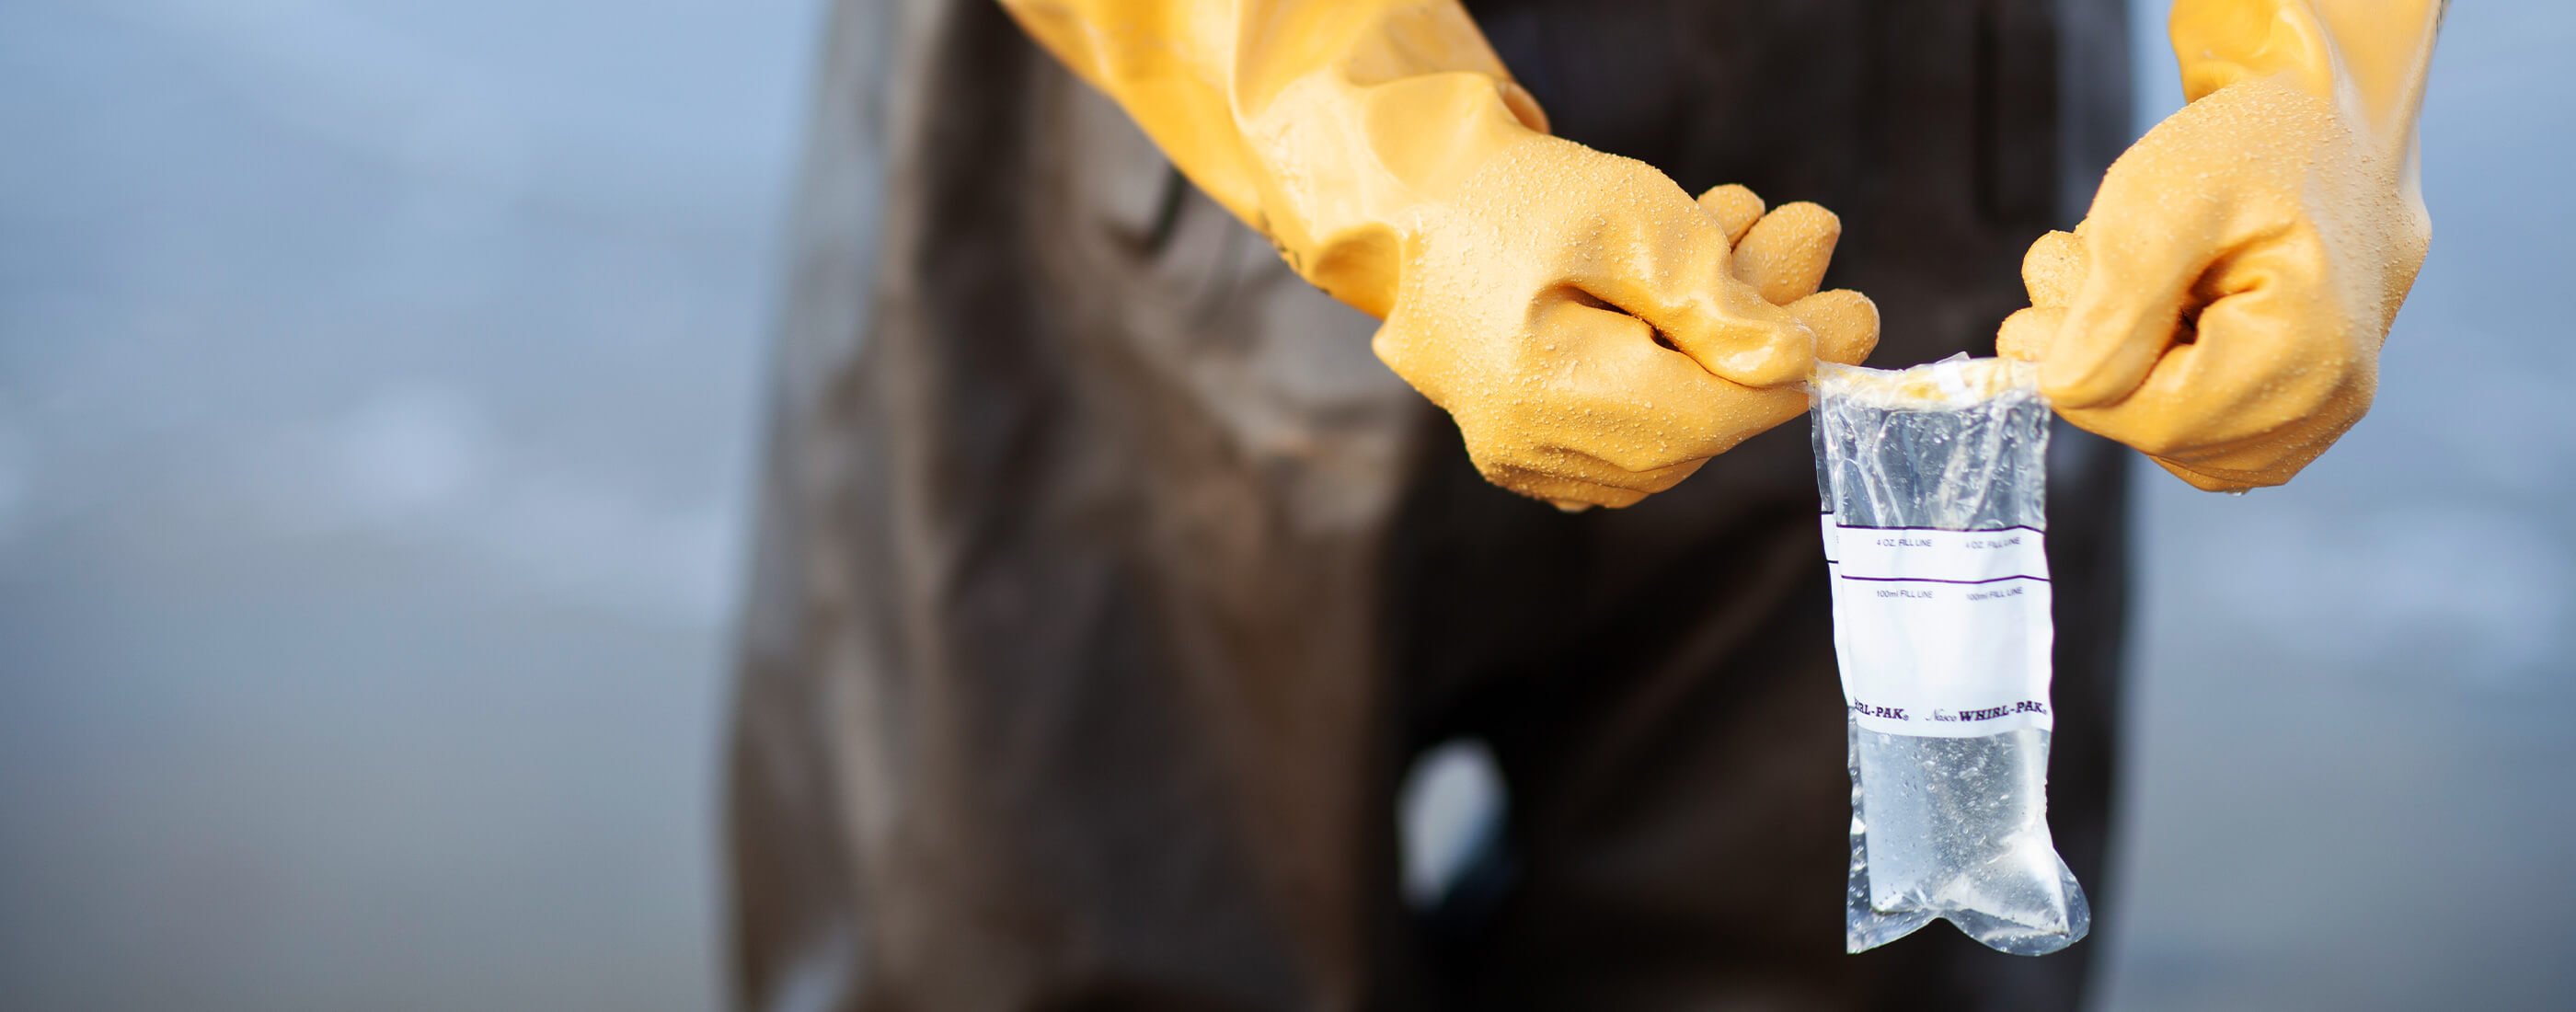 Hands in yellow gloves hold up a sample bag filled with ocean water.